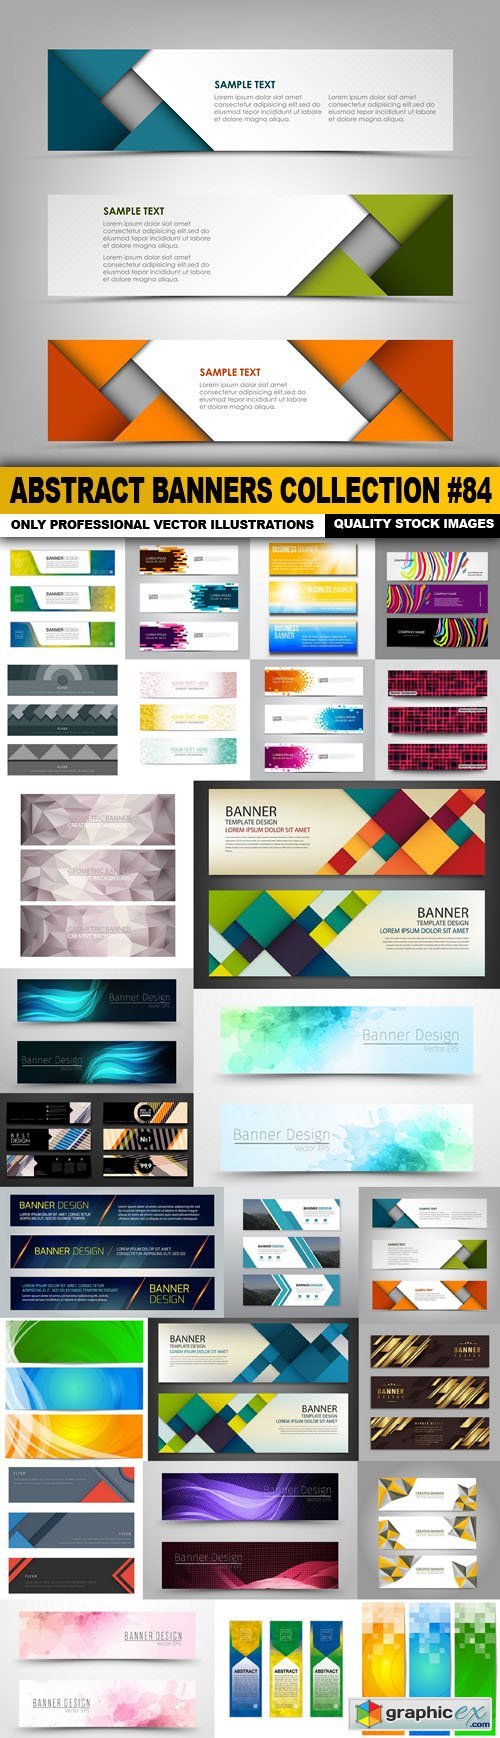 Abstract Banners Collection #84